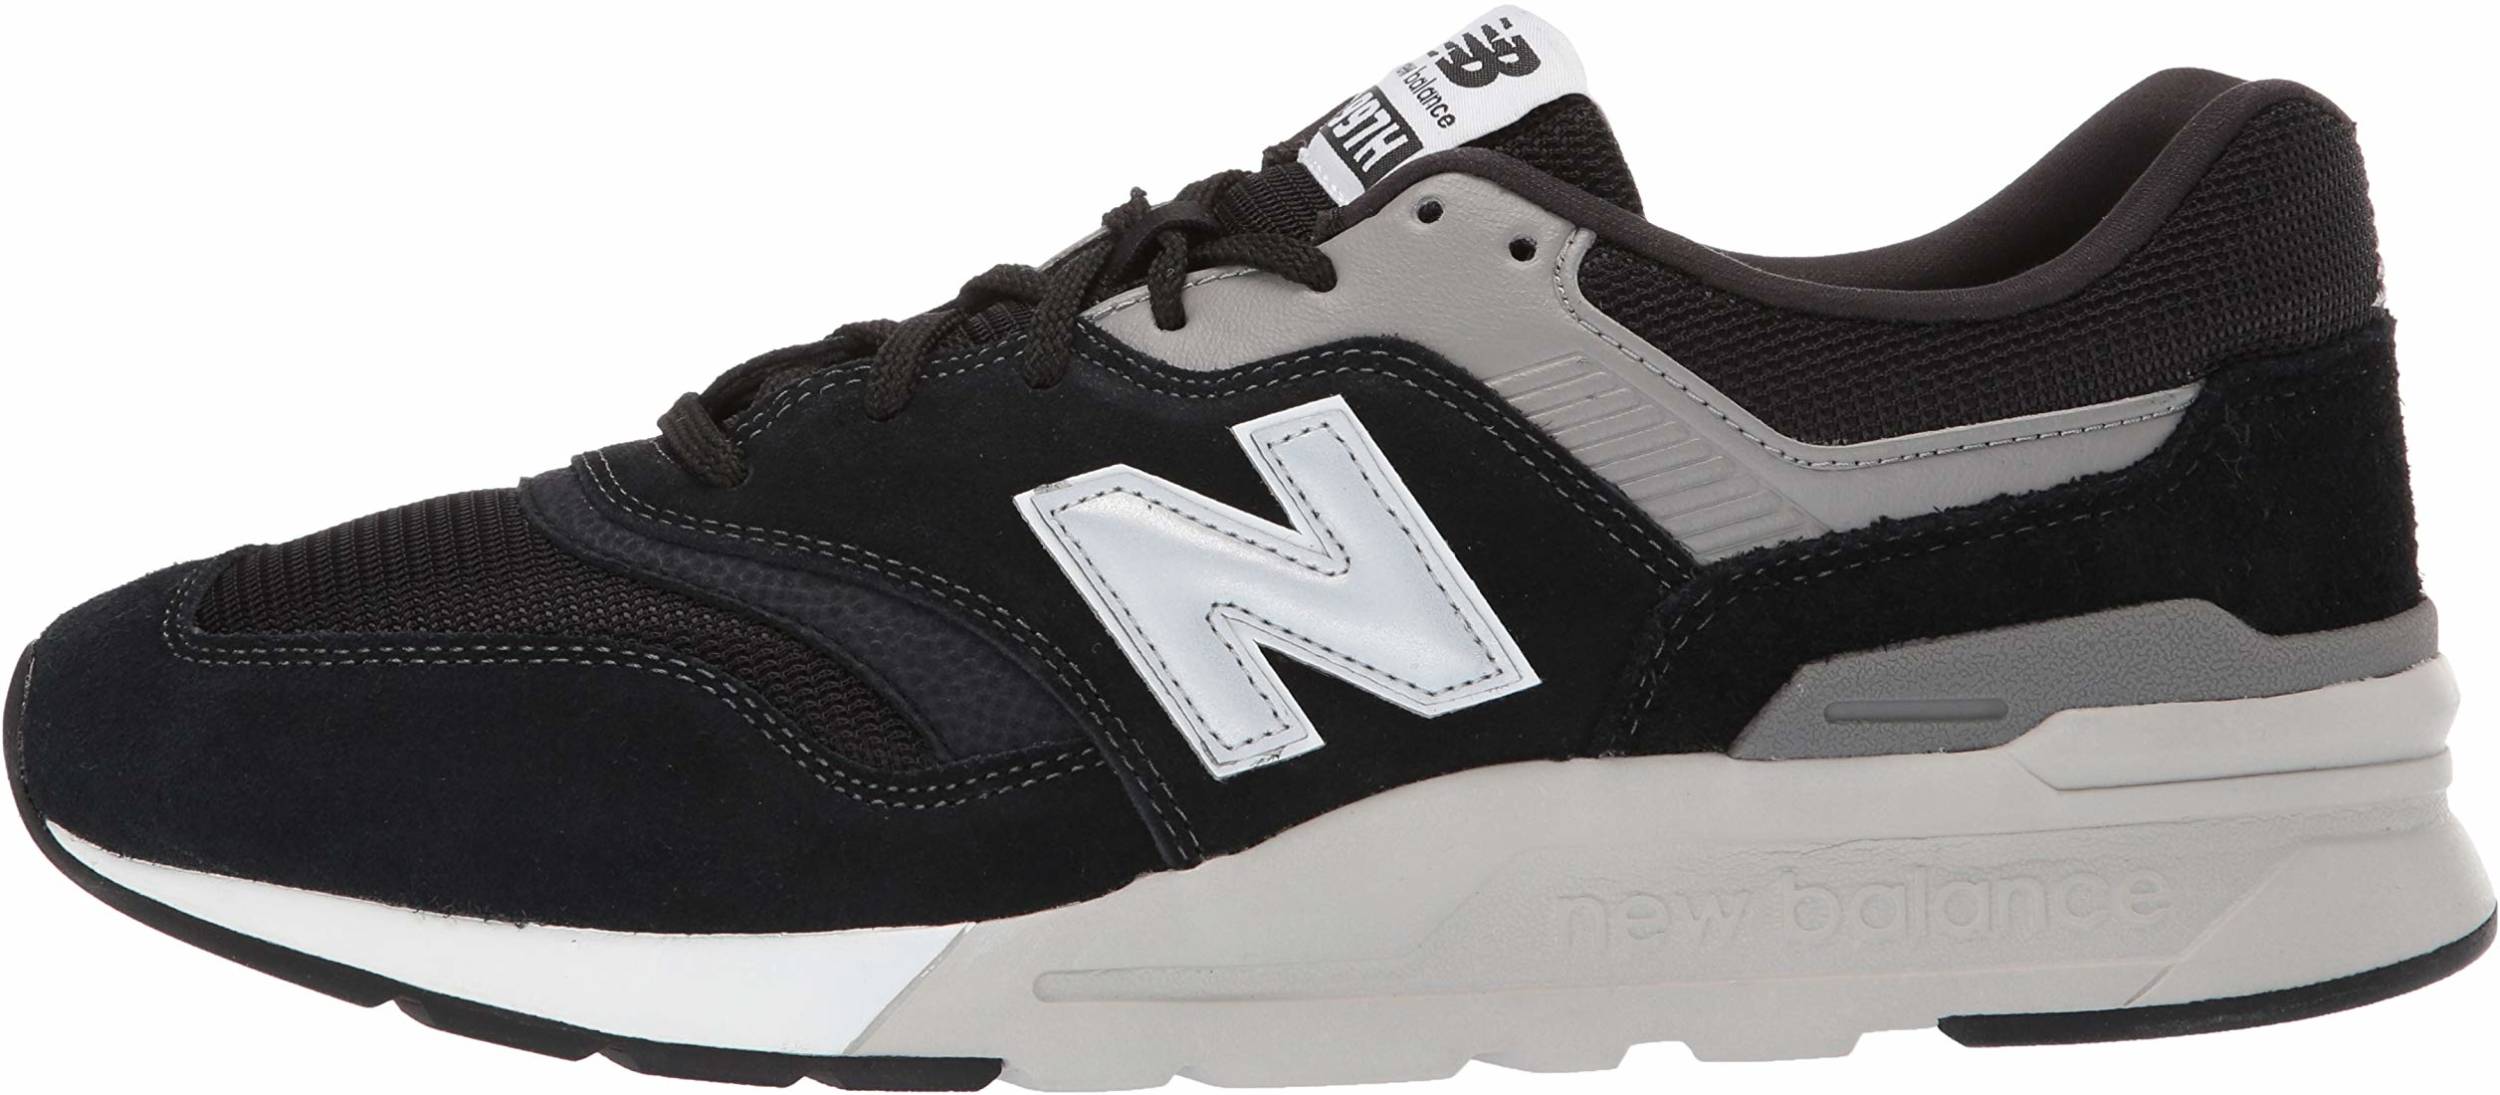 New Balance 997H sneakers in 20 colors (only $29) | RunRepeat